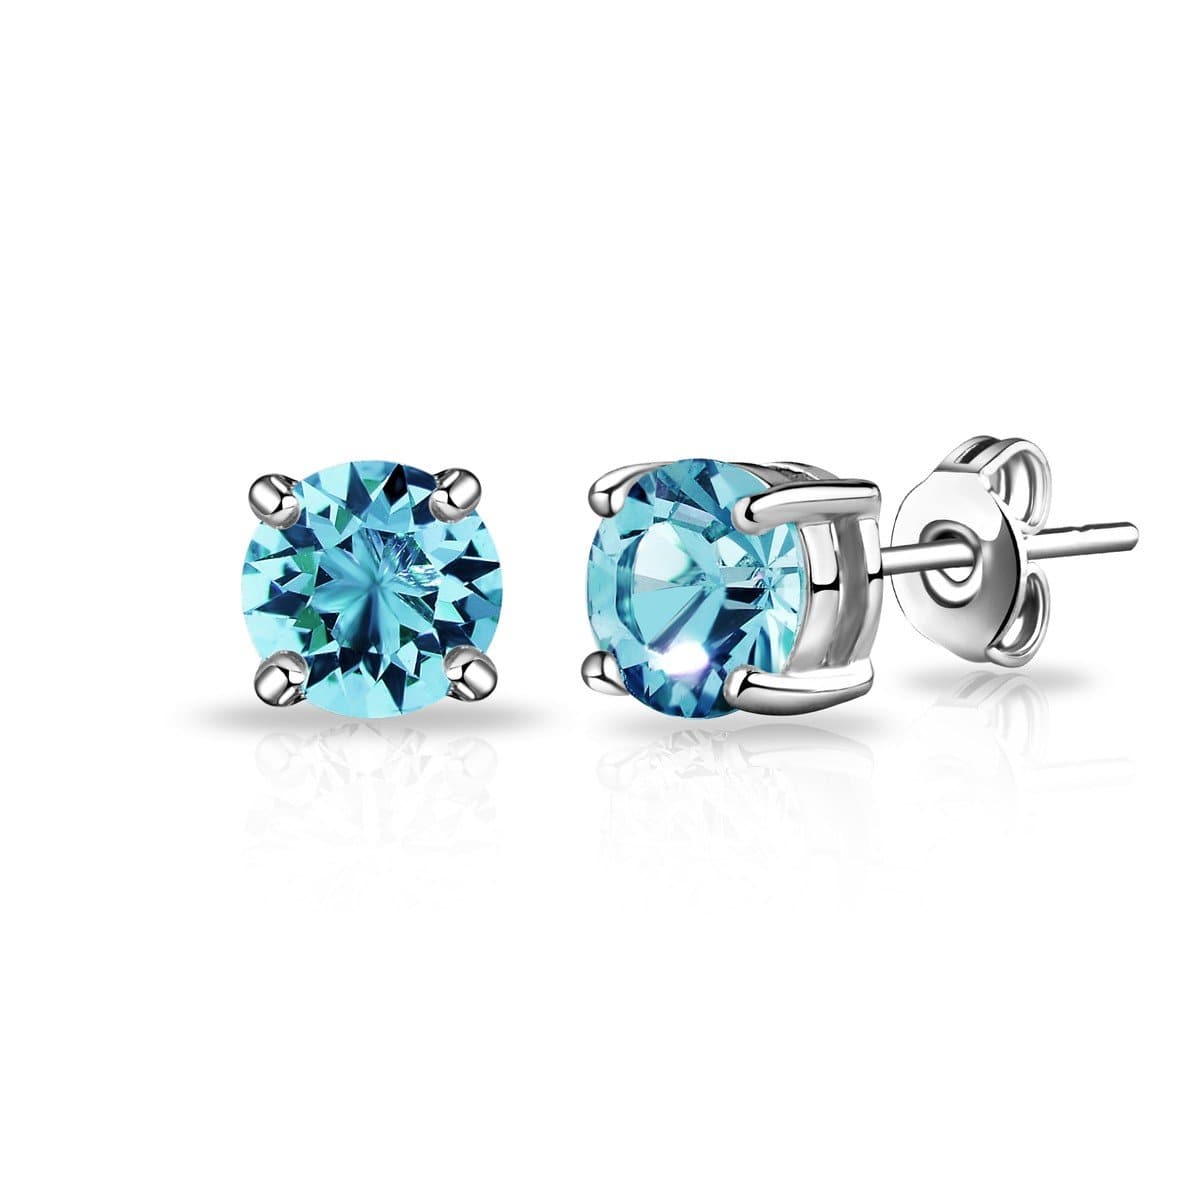 March (Aquamarine) Birthstone Earrings Created with Zircondia® Crystals